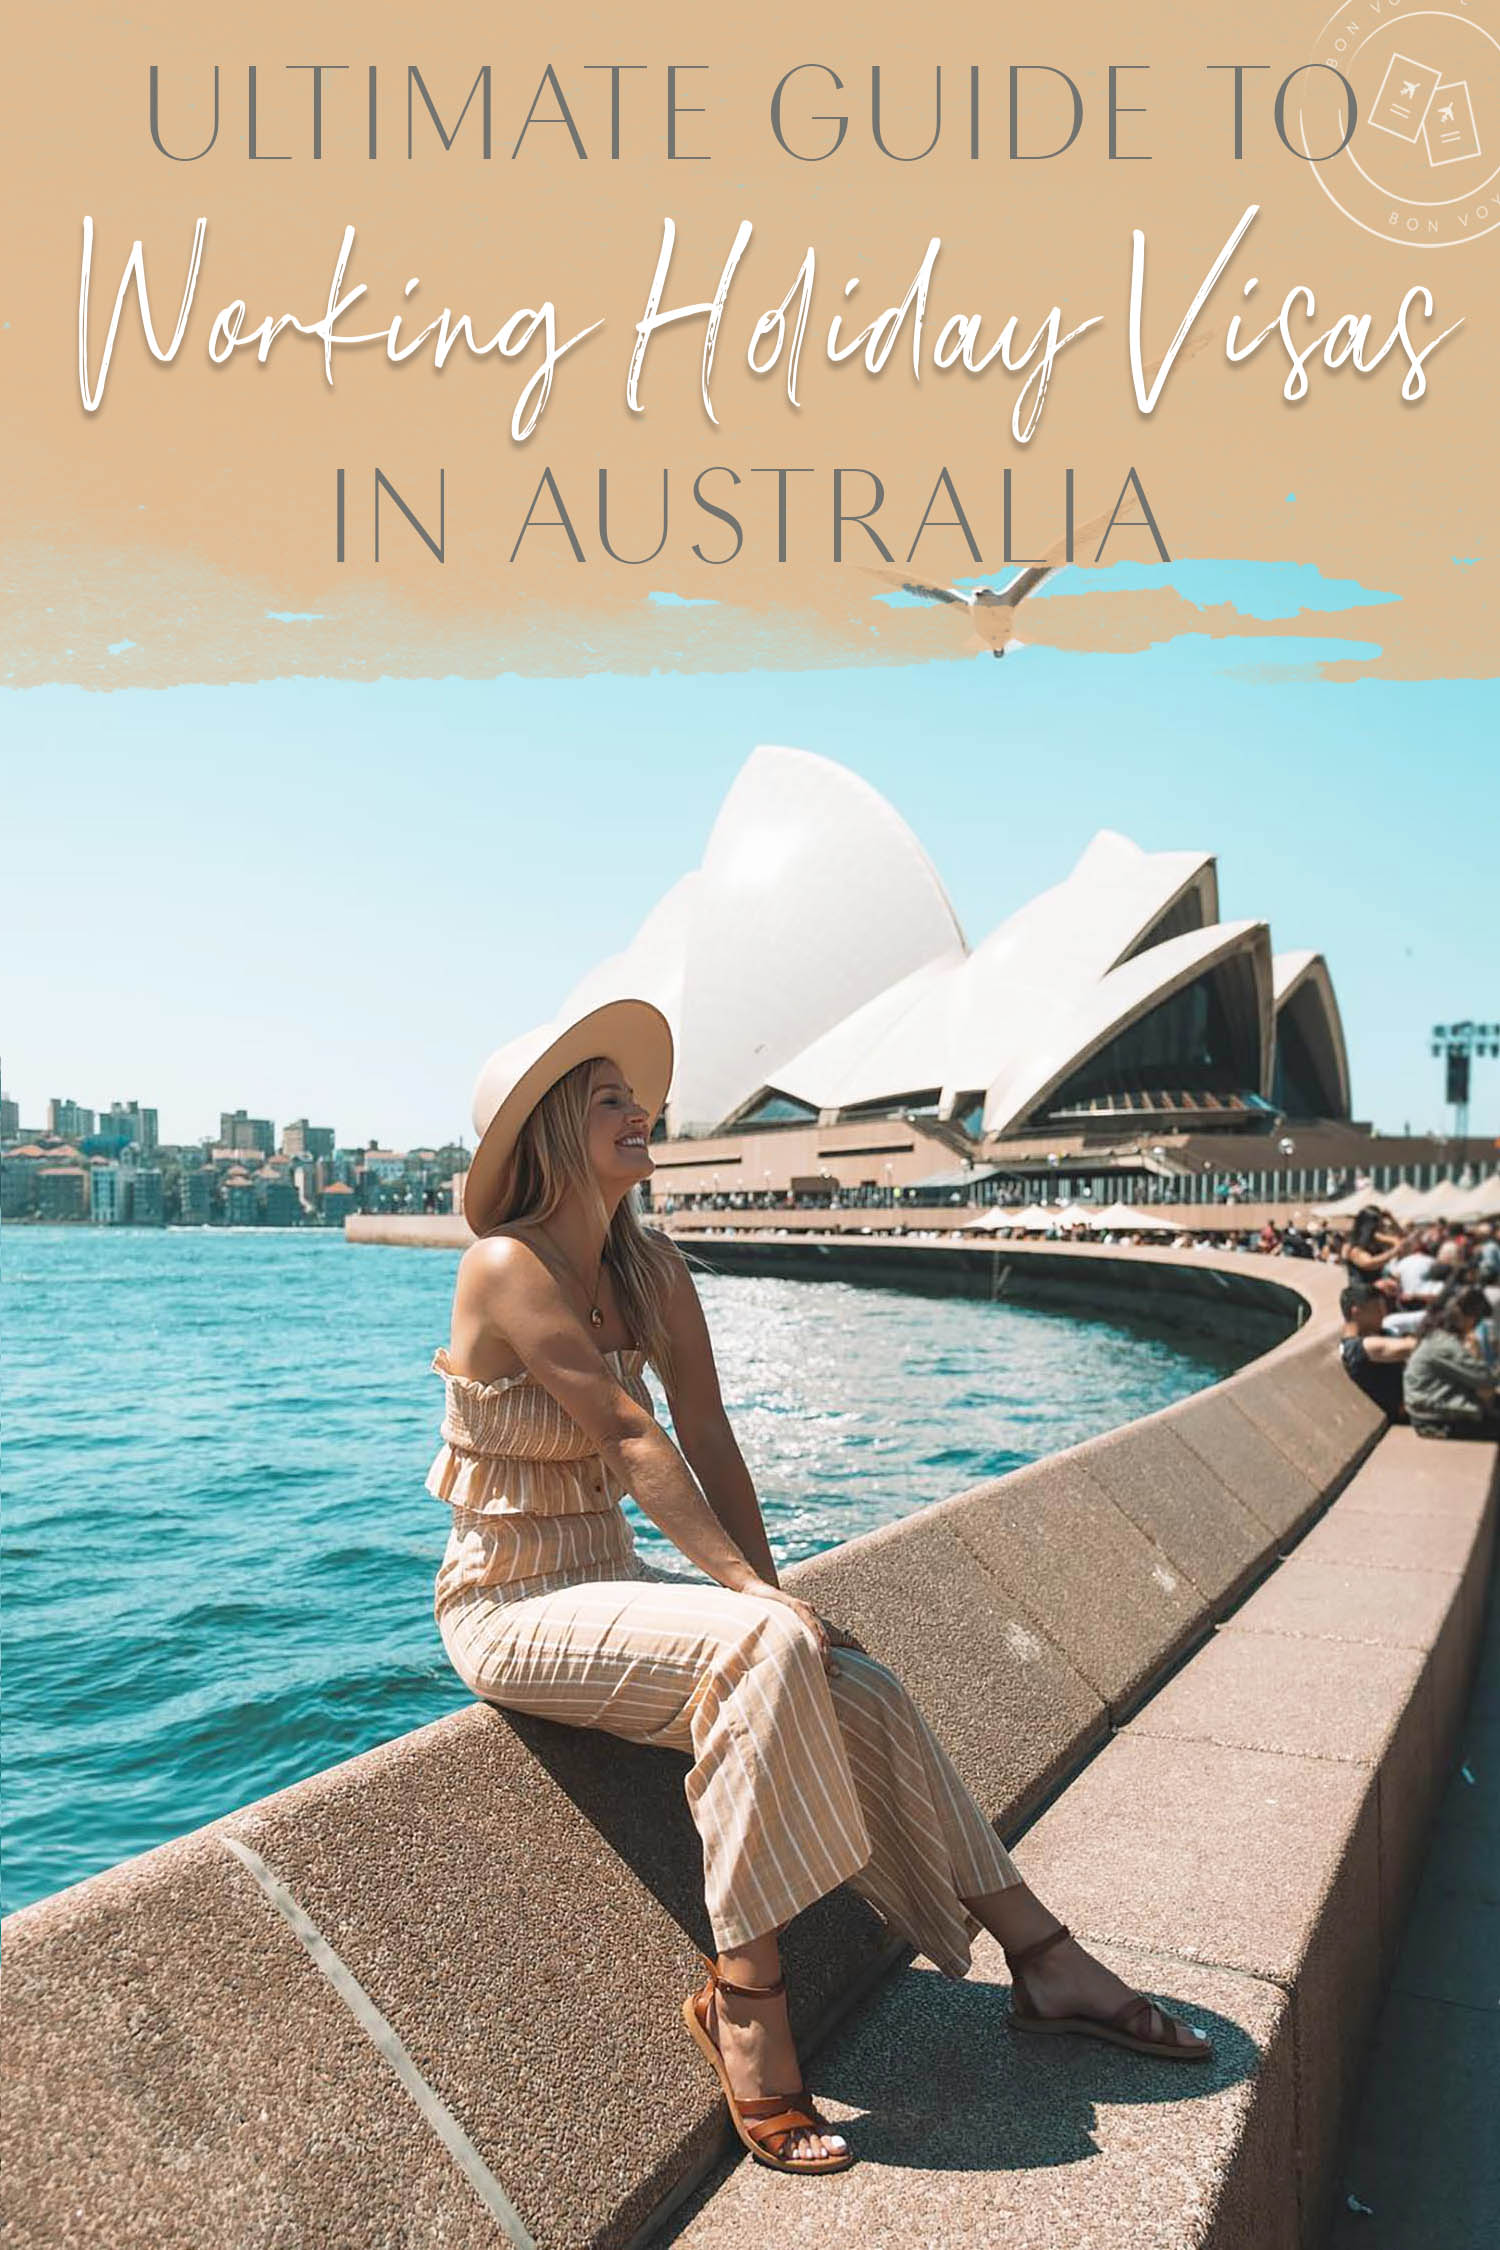 Ultimate Guide to Working Holiday Visa in Australia